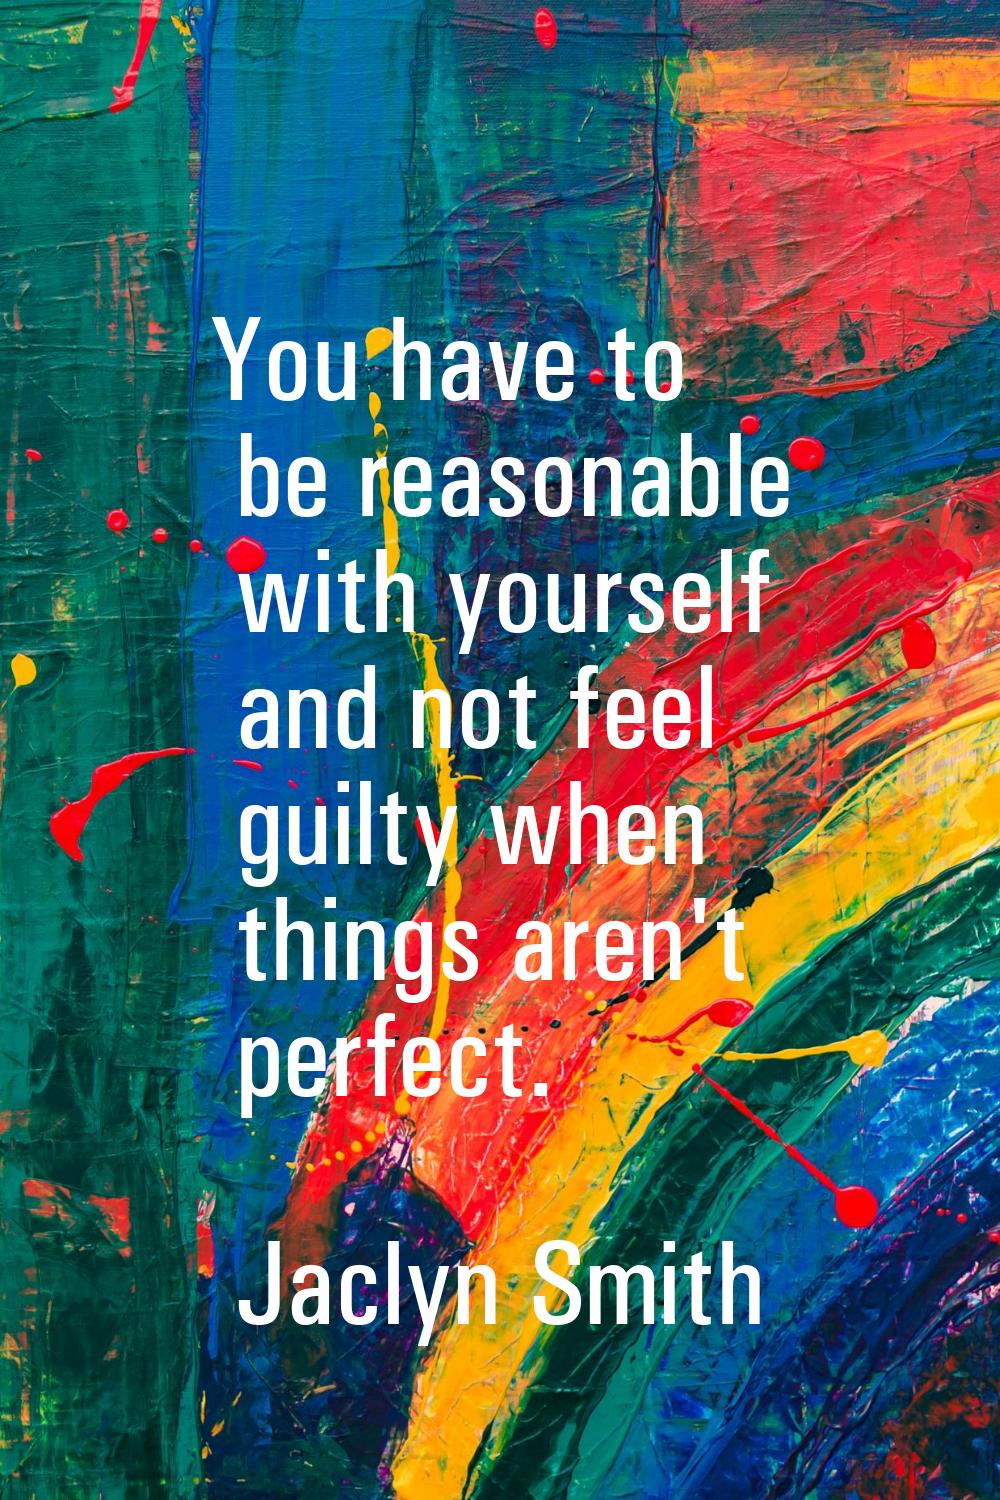 You have to be reasonable with yourself and not feel guilty when things aren't perfect.